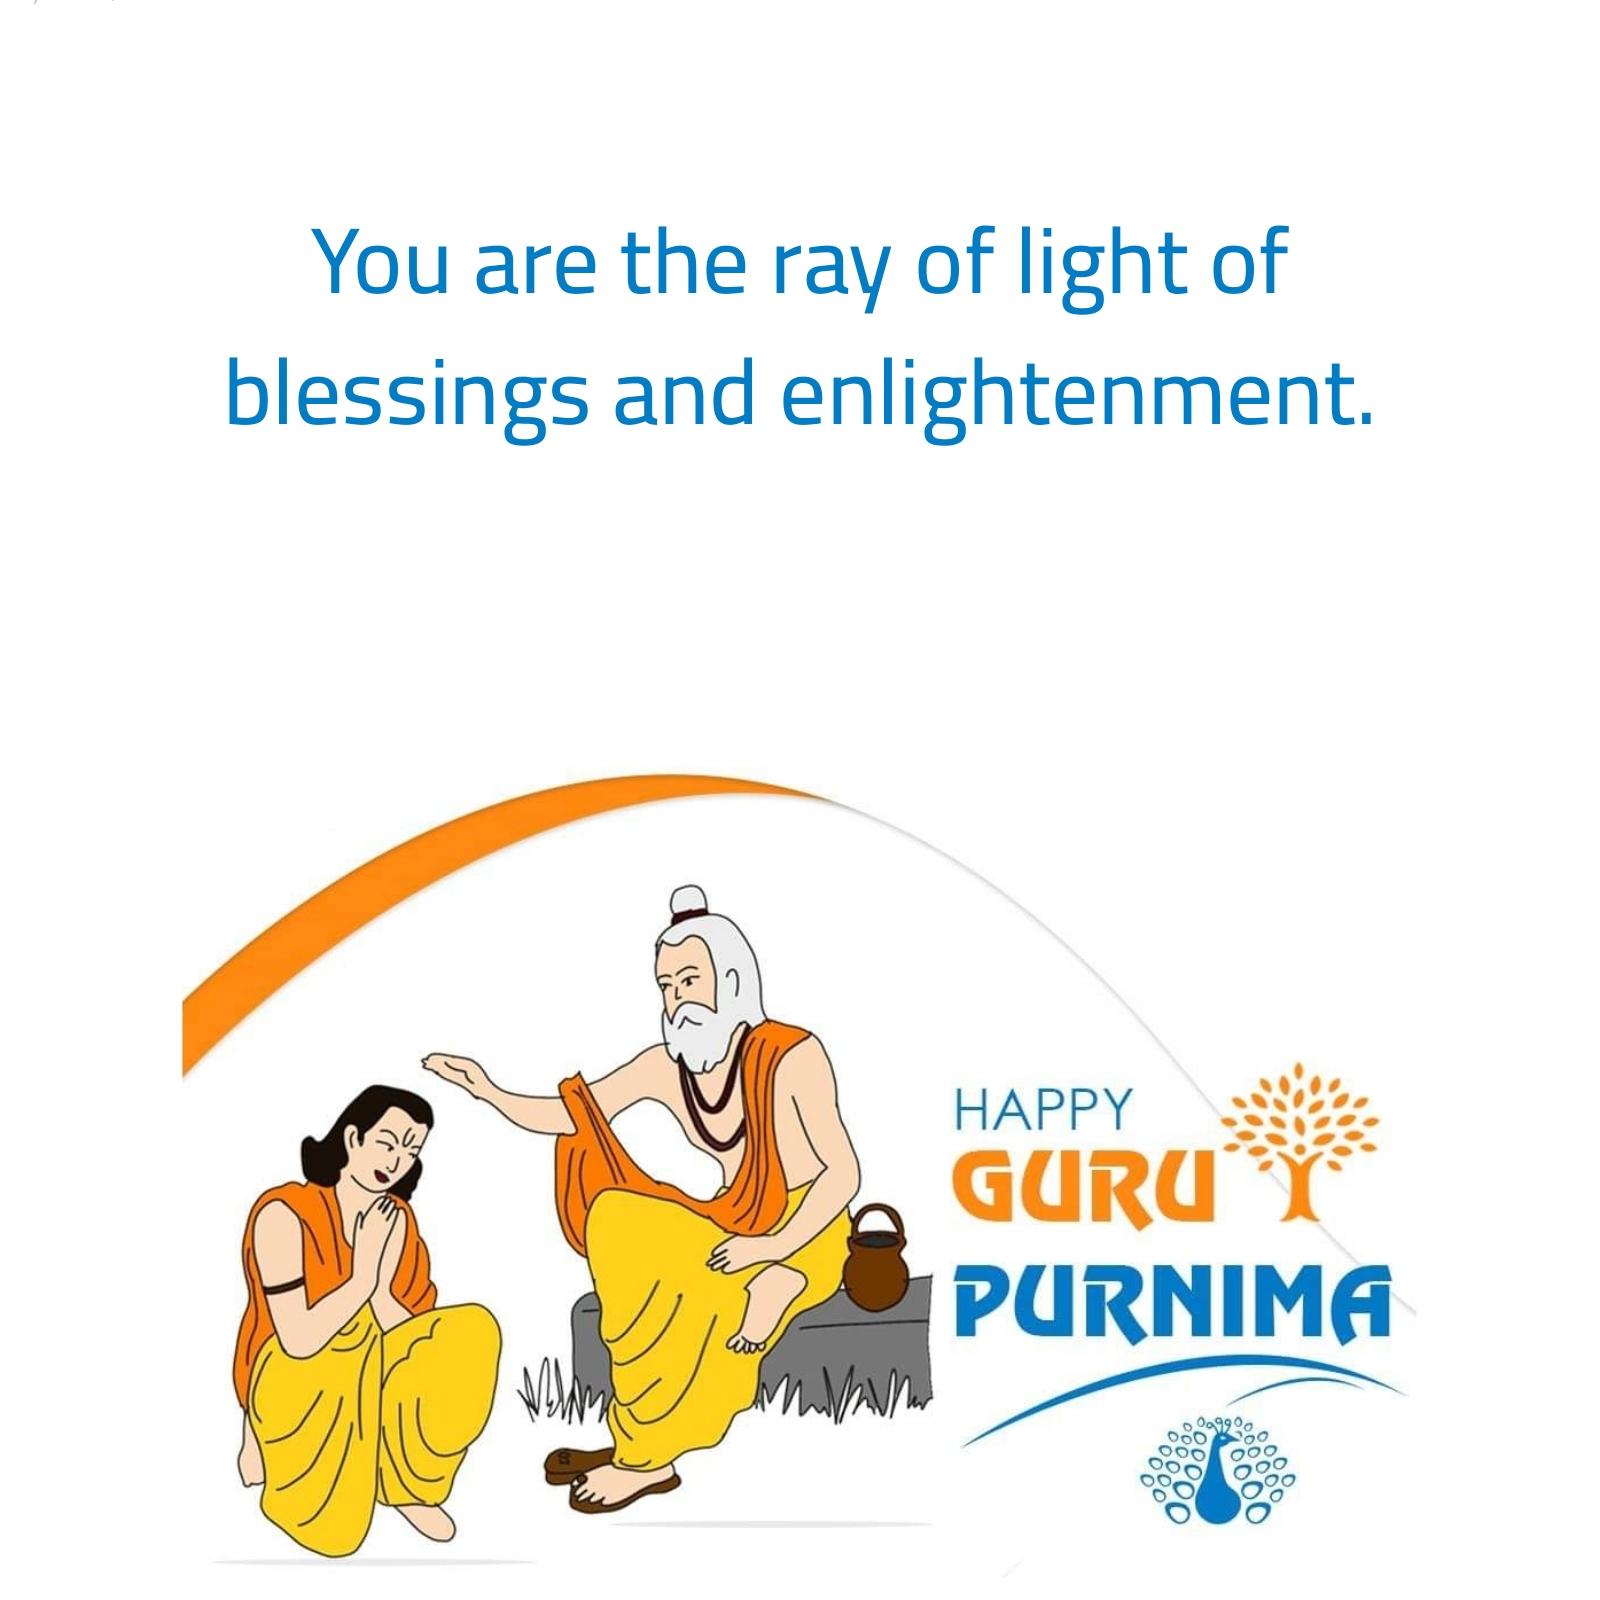 You are the ray of light of blessings and enlightenment